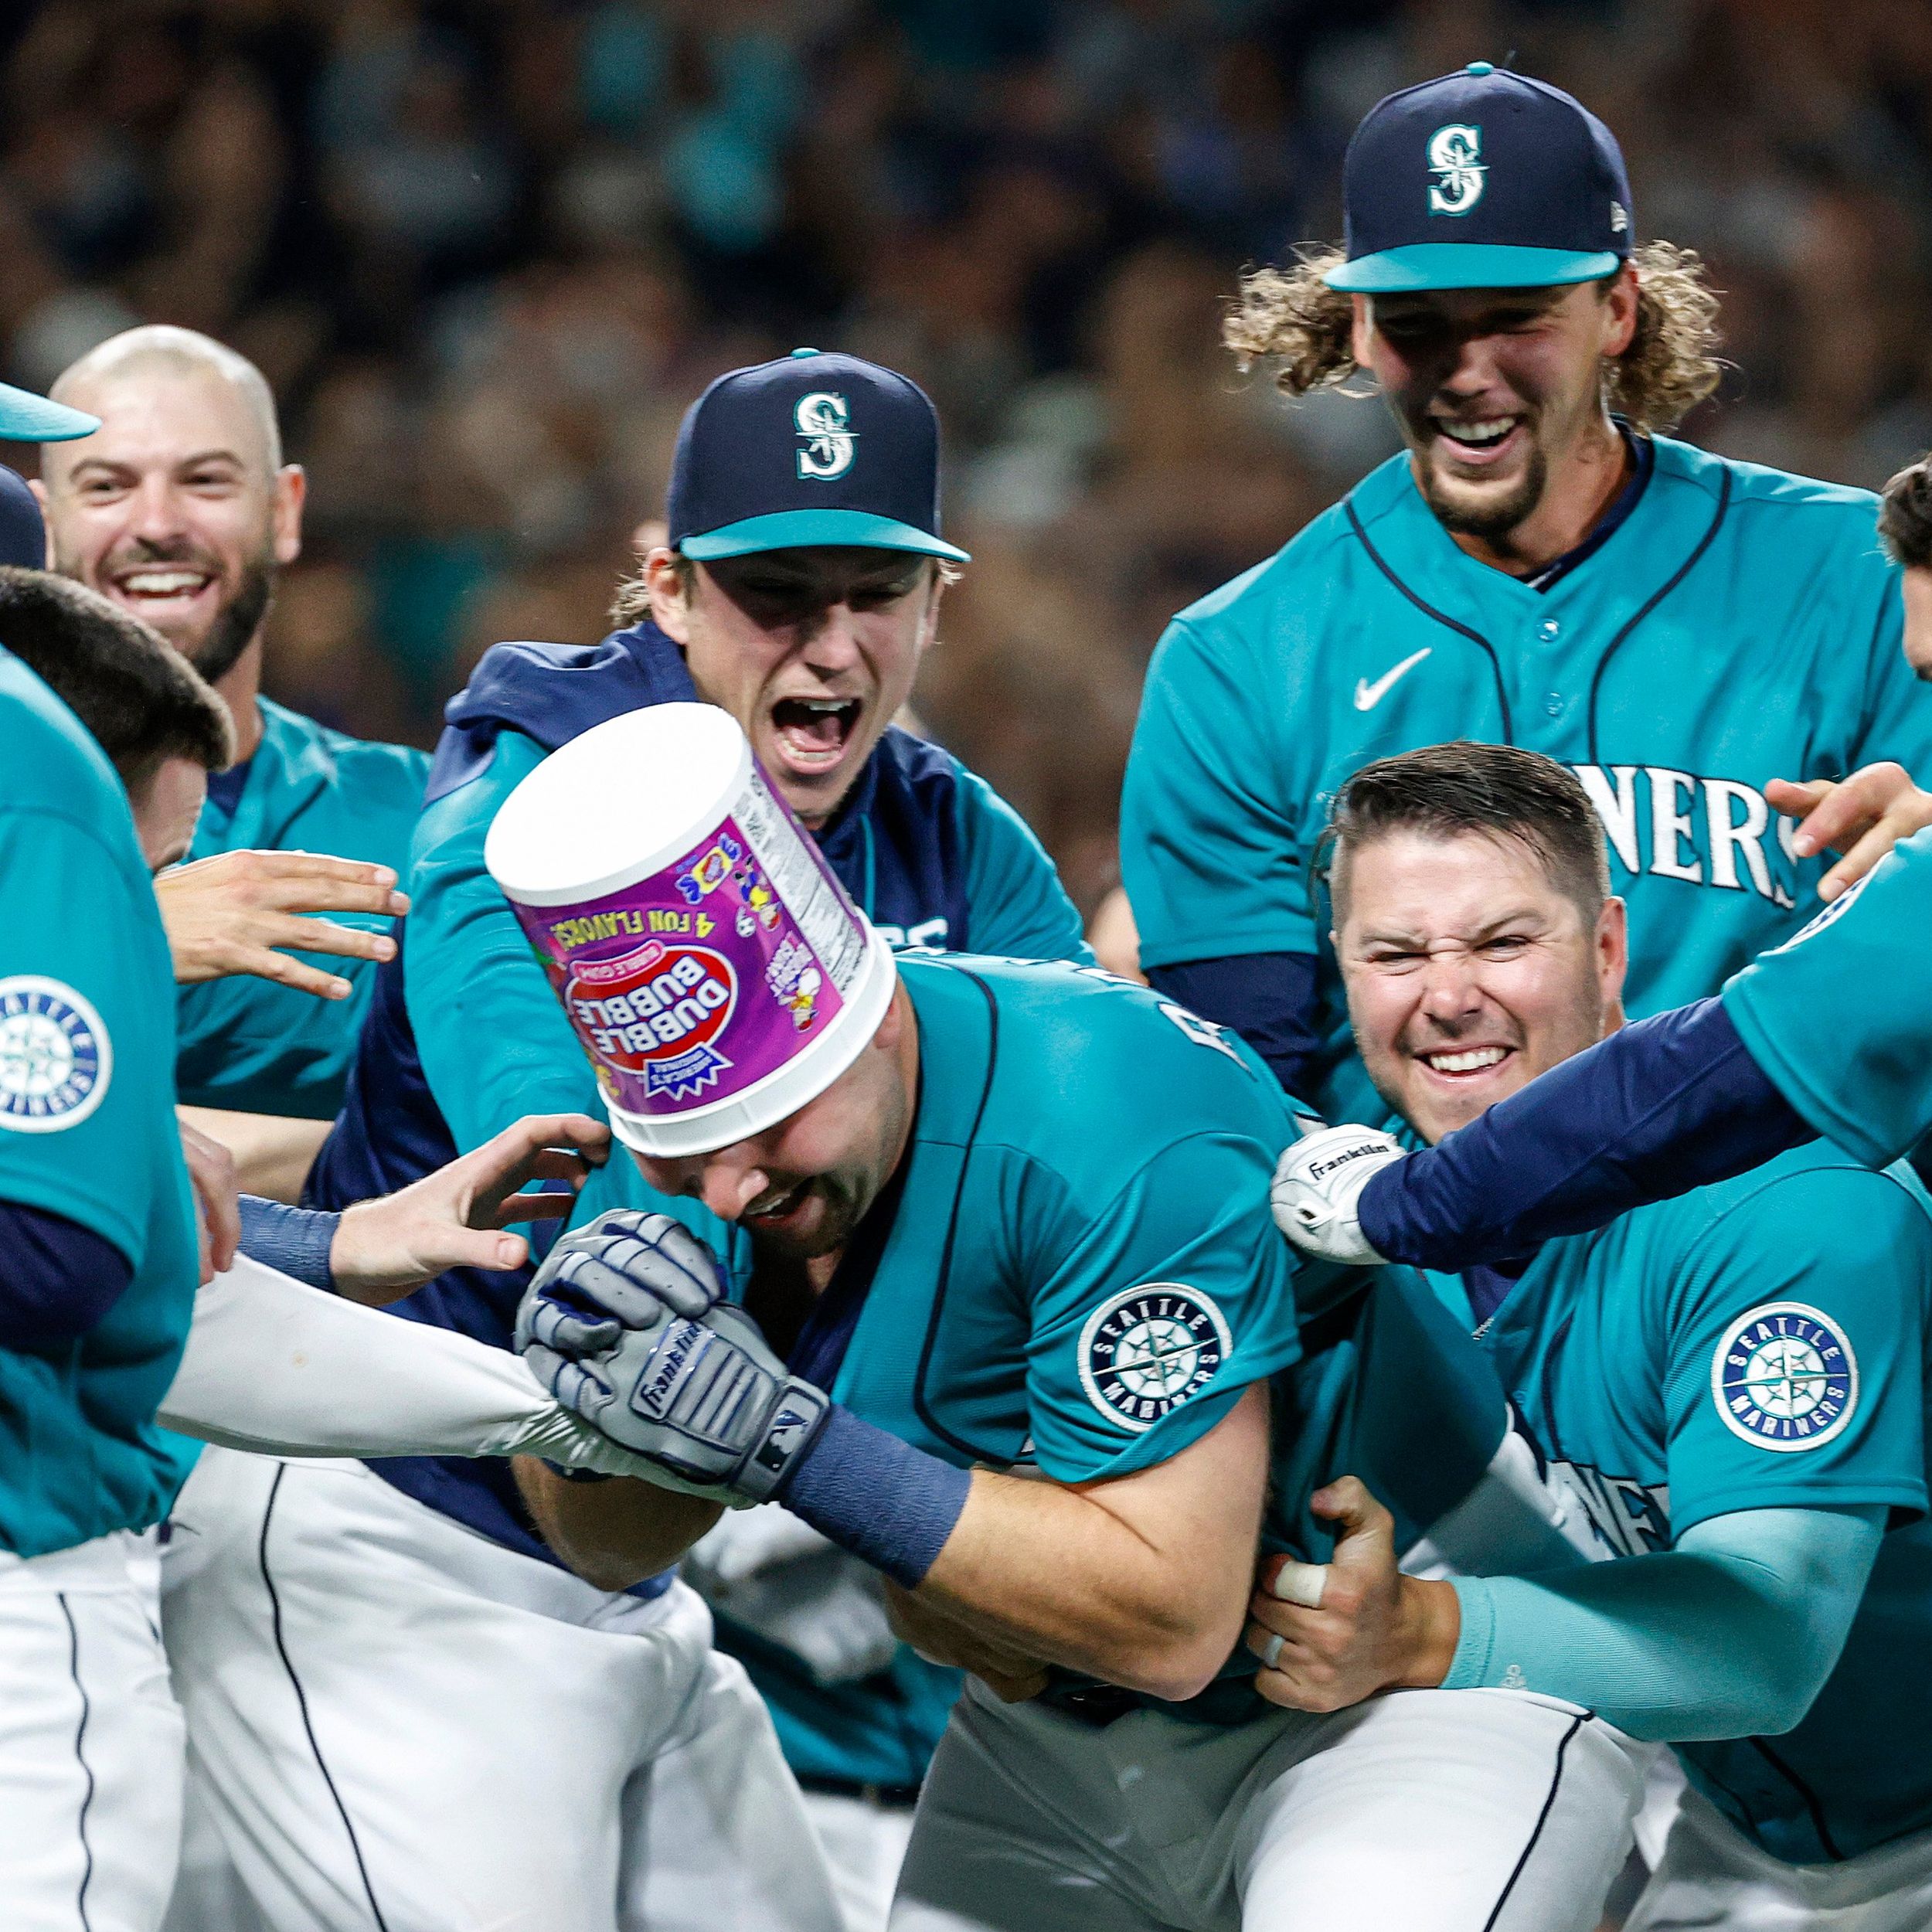 Cal Raleigh's walk-off home run ends Seattle Mariners' 21-year playoff  drought, Seattle Mariners